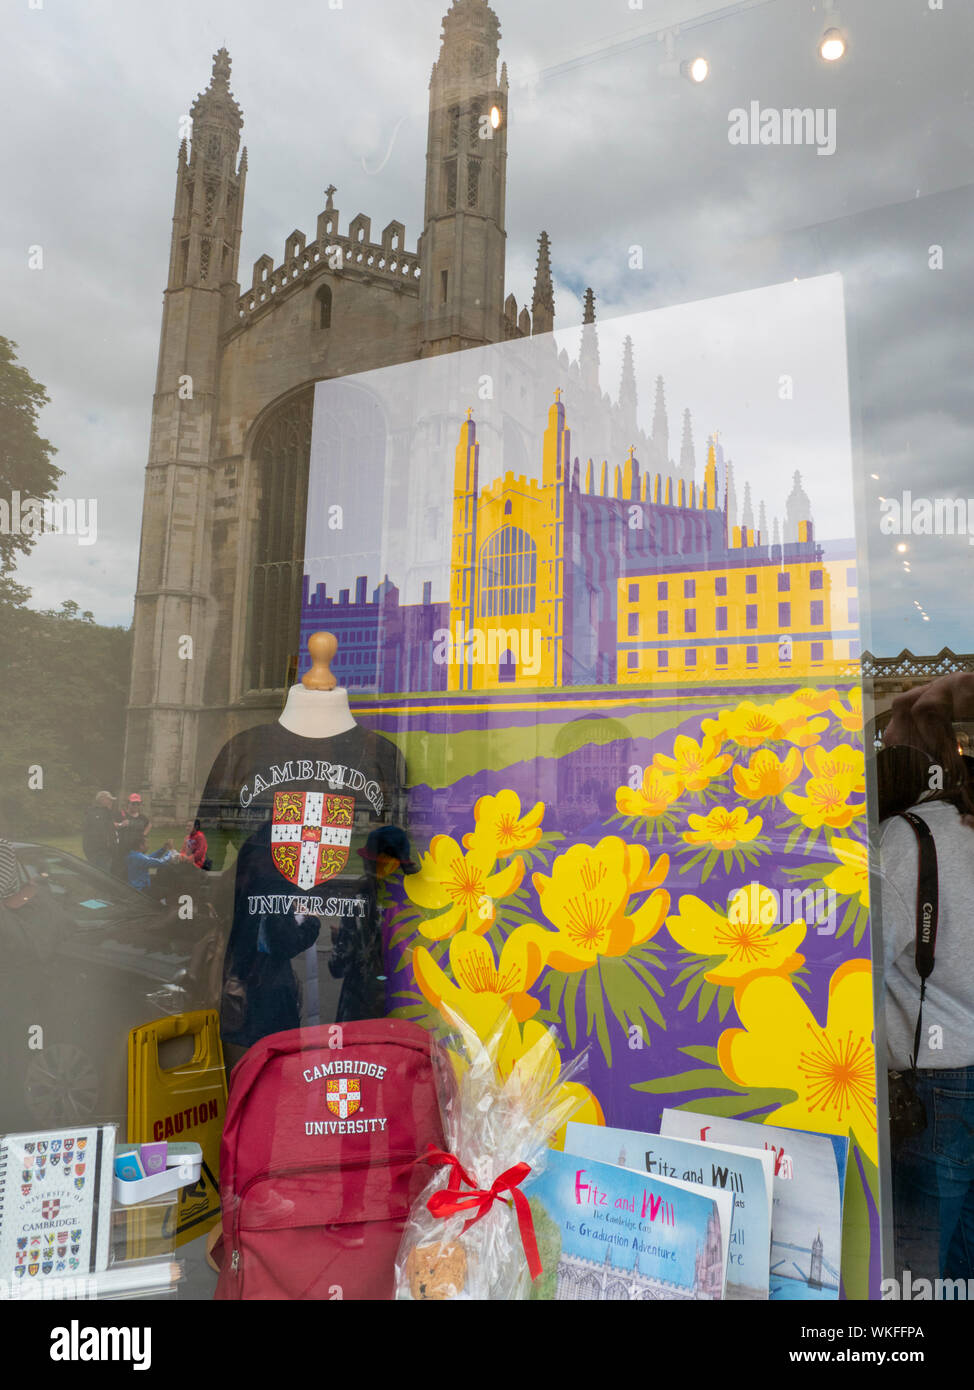 The Kings College chapel reflecting in the window of the Kings College Chapel shop in Kings Parade Cambridge UK which sells tourist souvenirs Stock Photo